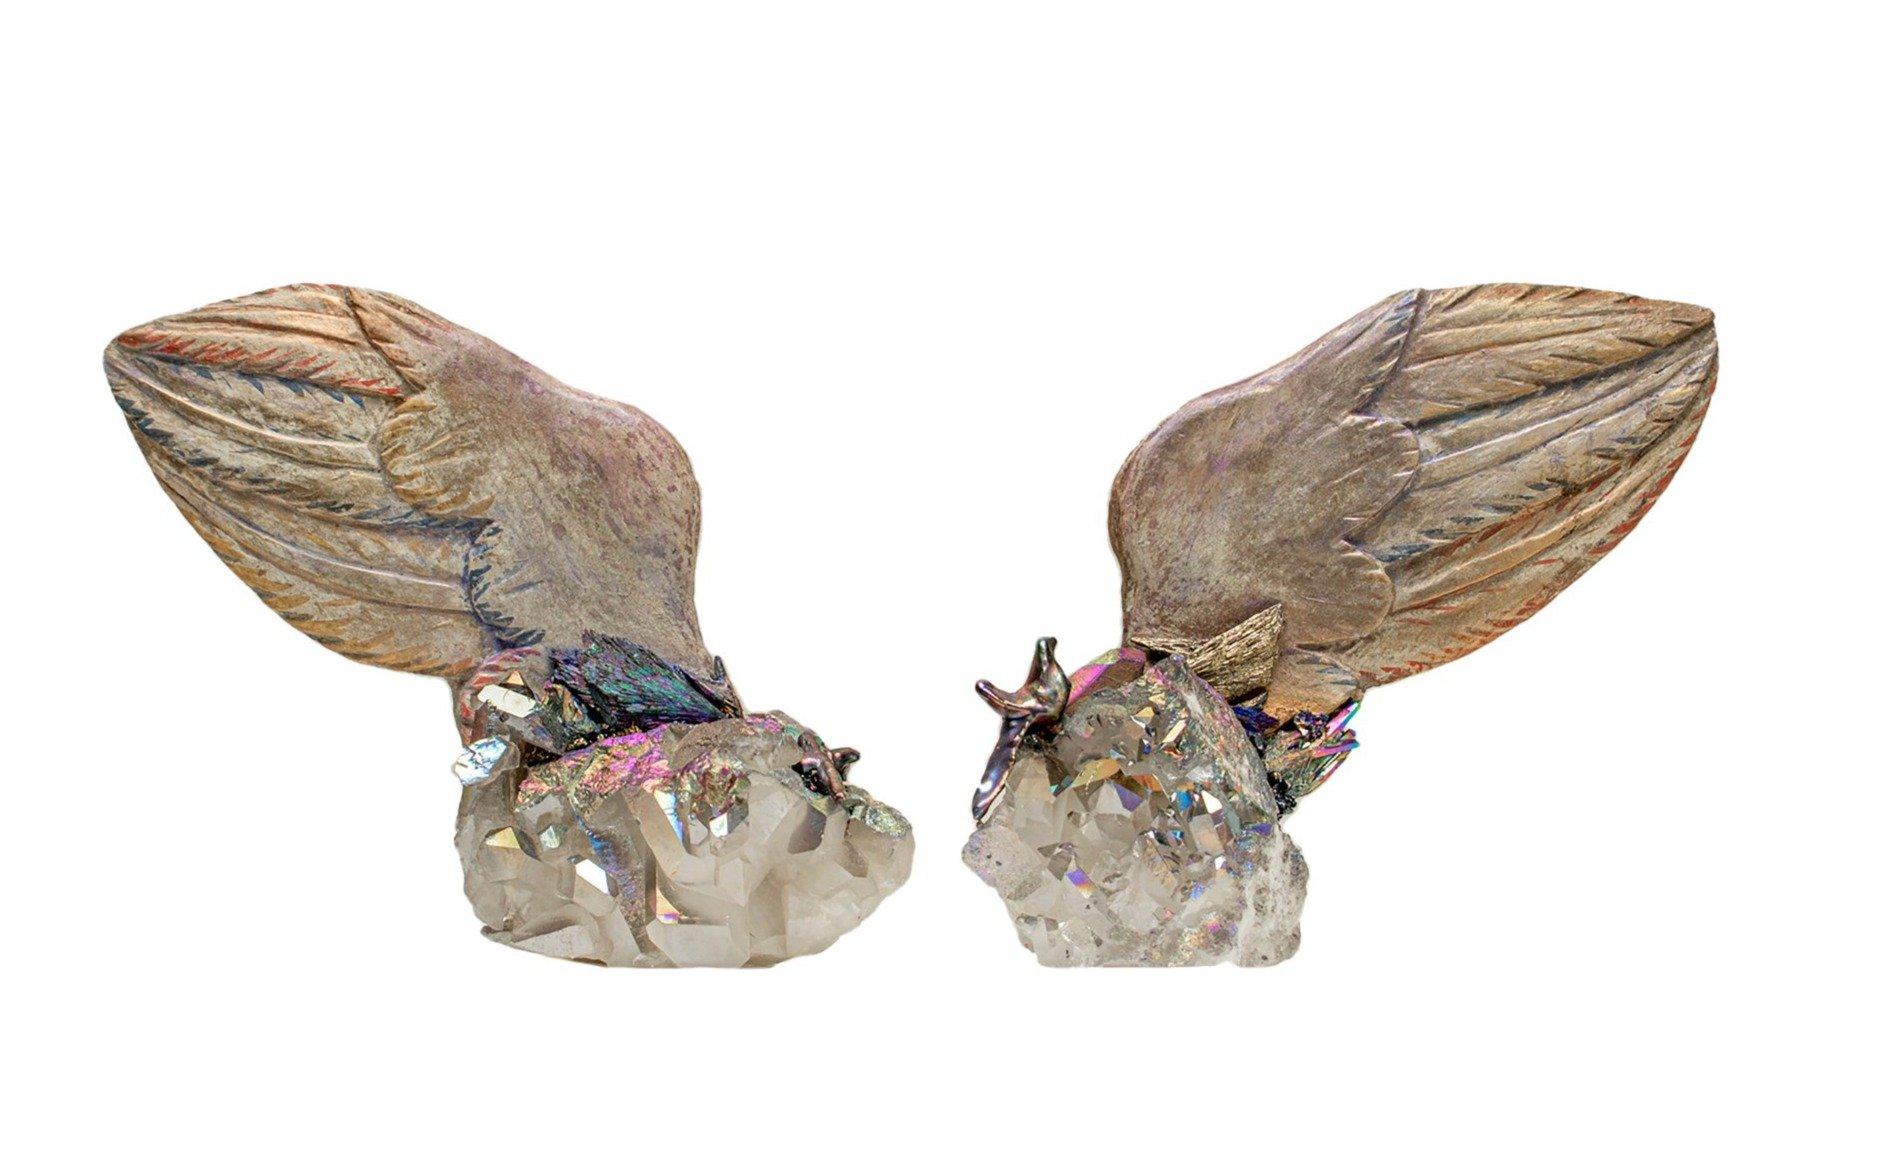 Pair of 18th century Italian hand-carved and painted angel wings on titanium quartz crystal clusters with natural-forming baroque pearls in the shape of a cross and gold and titanium plated kyanite.

The hand-carved multi-colored angel wings are